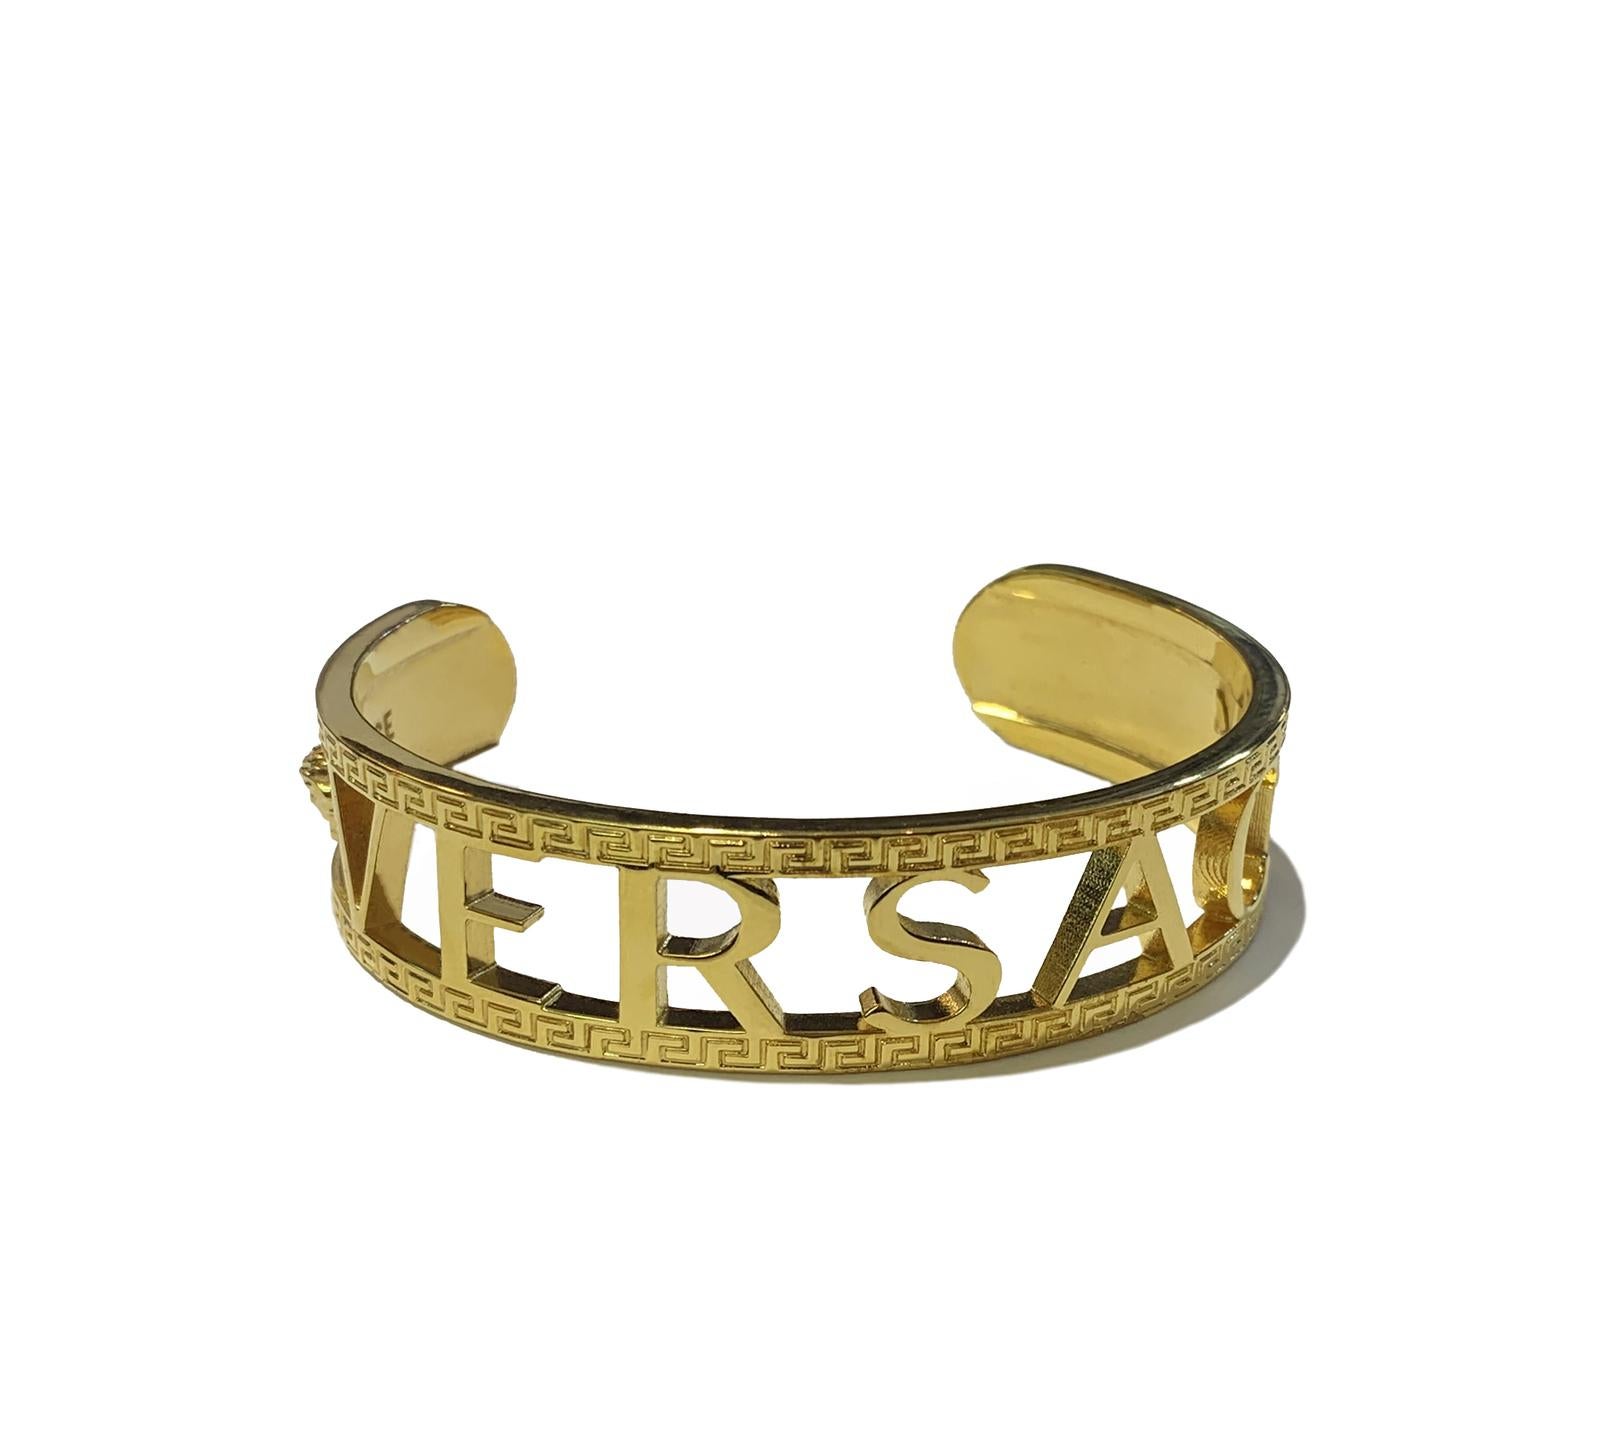 VERSACE MENS LOGO/GREEK KEY CUFF BRACELET.

-Display model. Good condition
-Open cuff bracelet in gold-tone
-Engraved Greek key pattern and logo throughout
-Signature Medusa engraved at face
-Logo engraved at inner band
-Approx. 2.5” diameter
-Inner